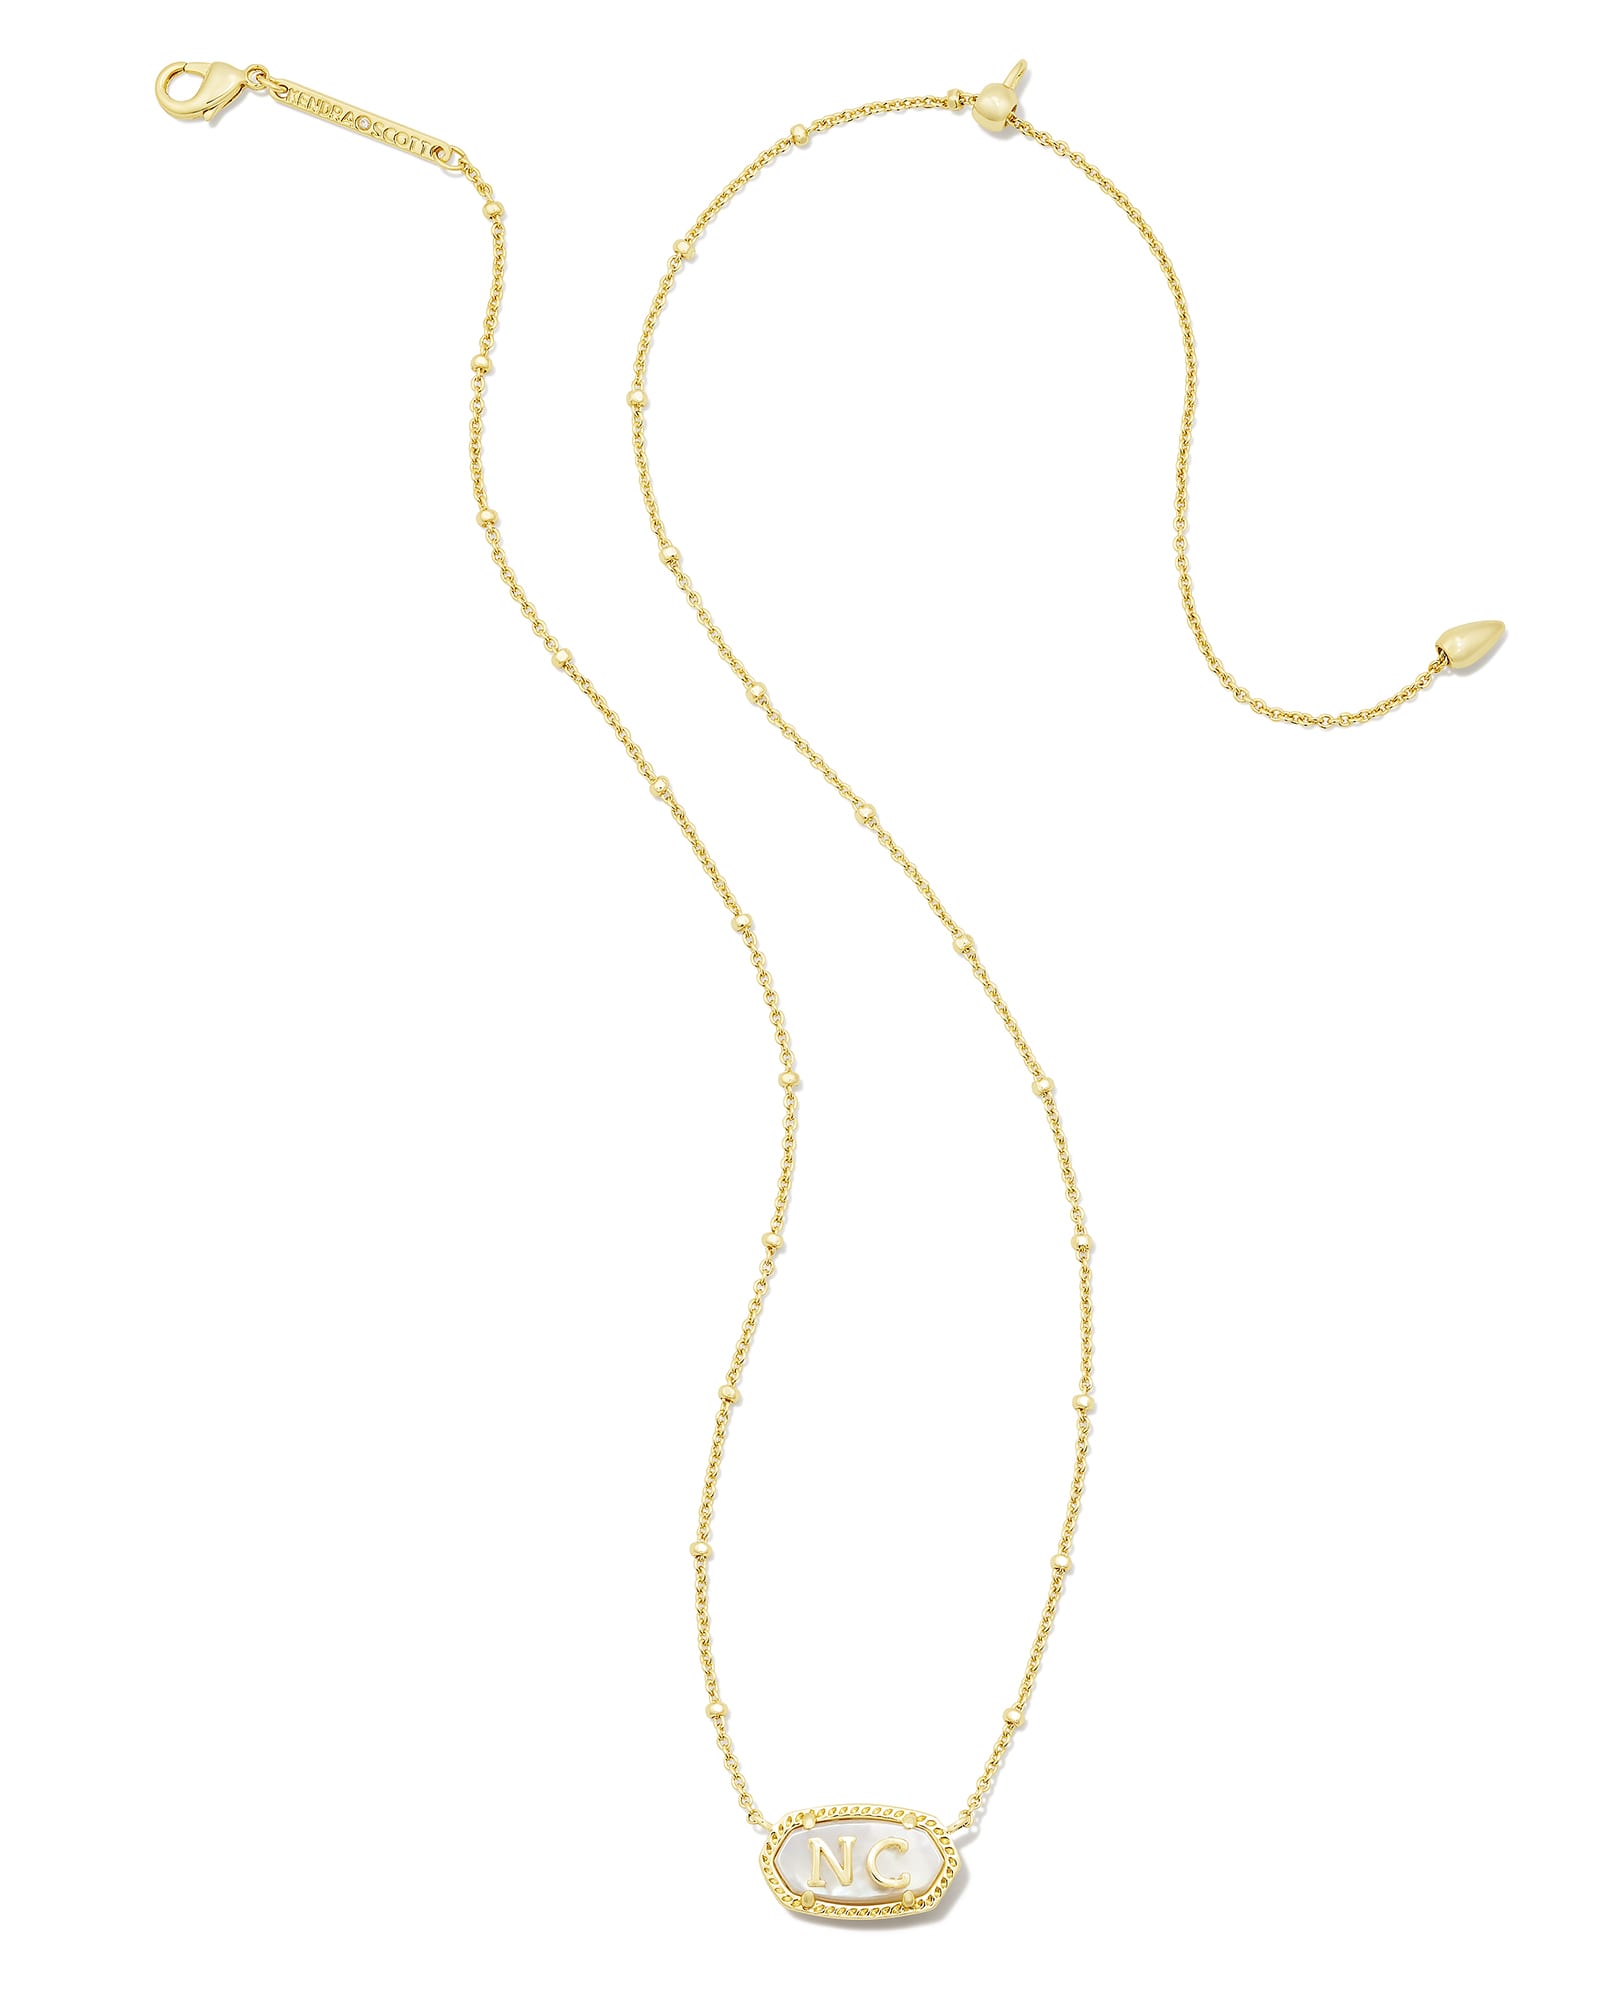 Elisa Gold North Carolina Necklace in Ivory Mother-of-Pearl